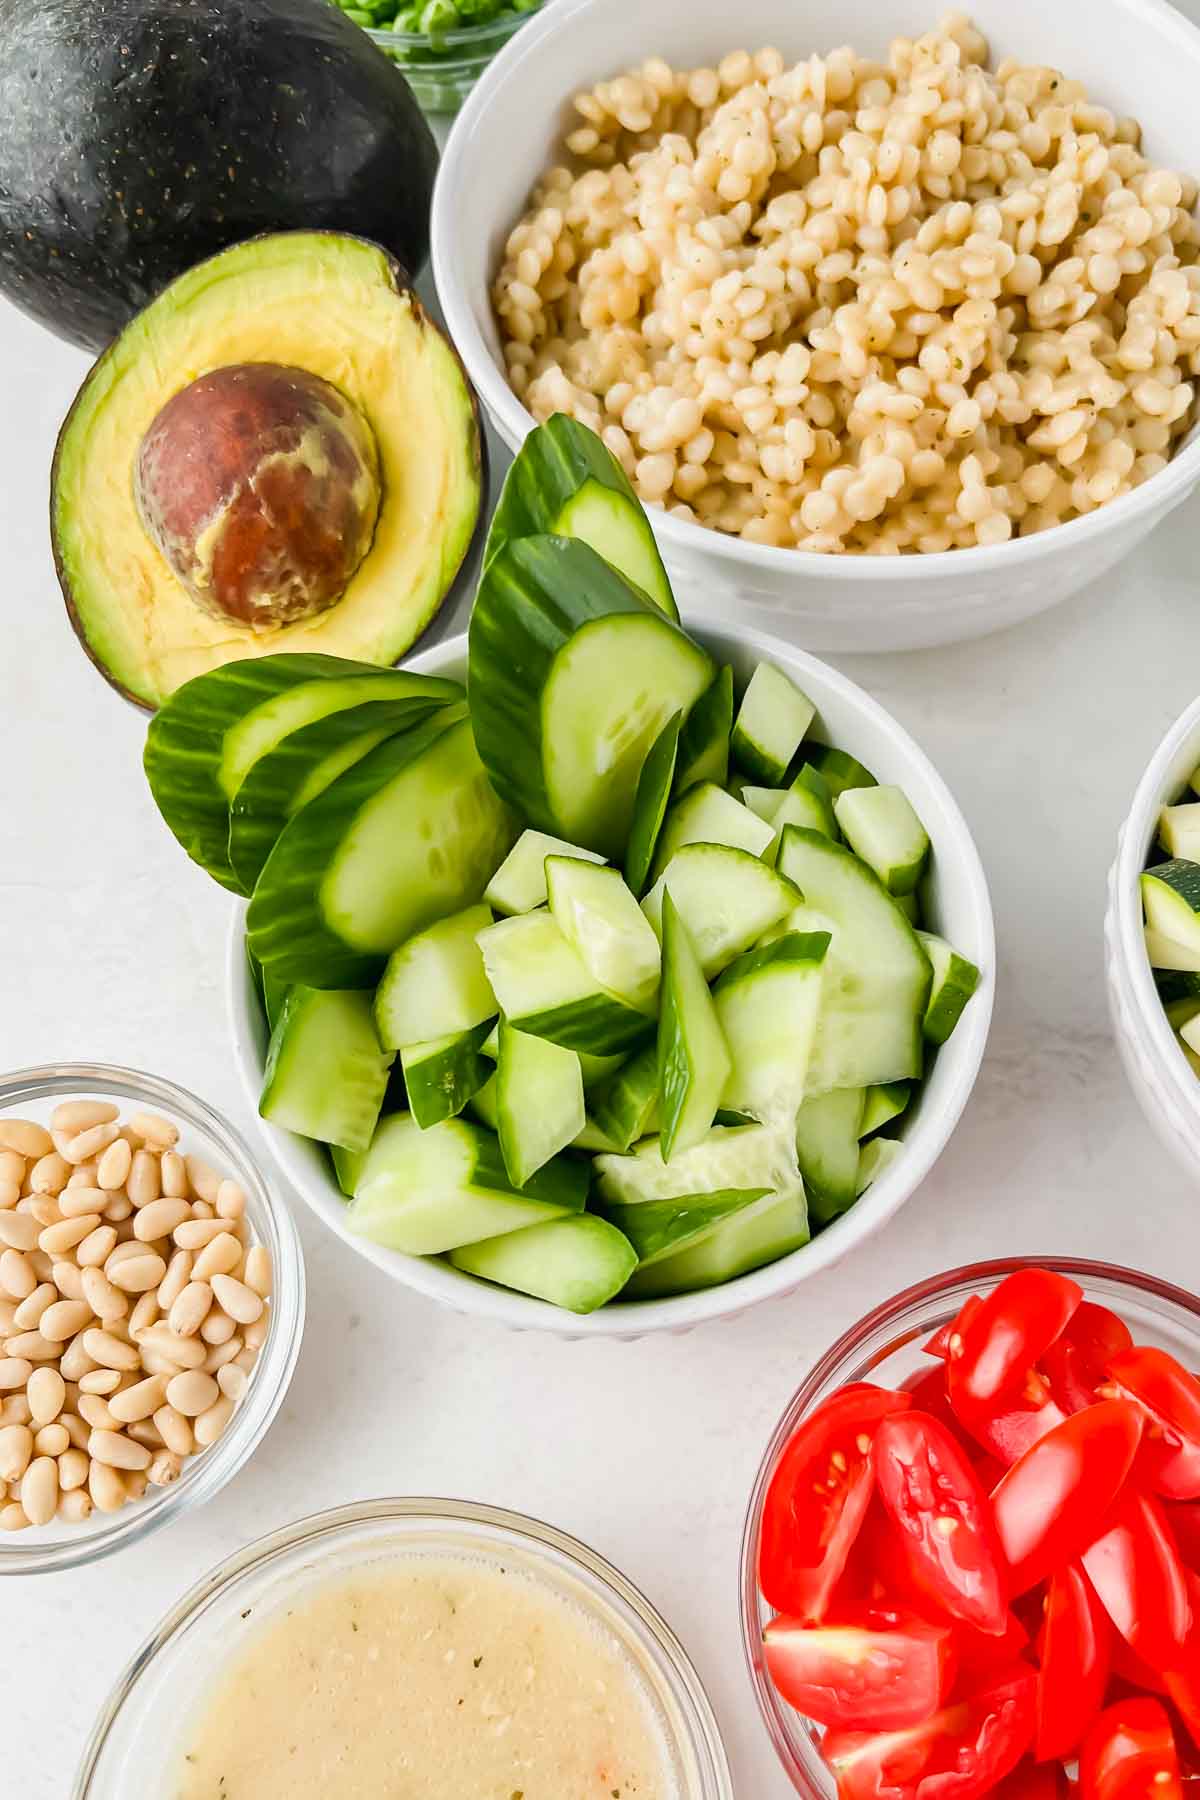 chopped cucumbers, pine nuts, couscous, tomatoes, and dressing in individual bowls.